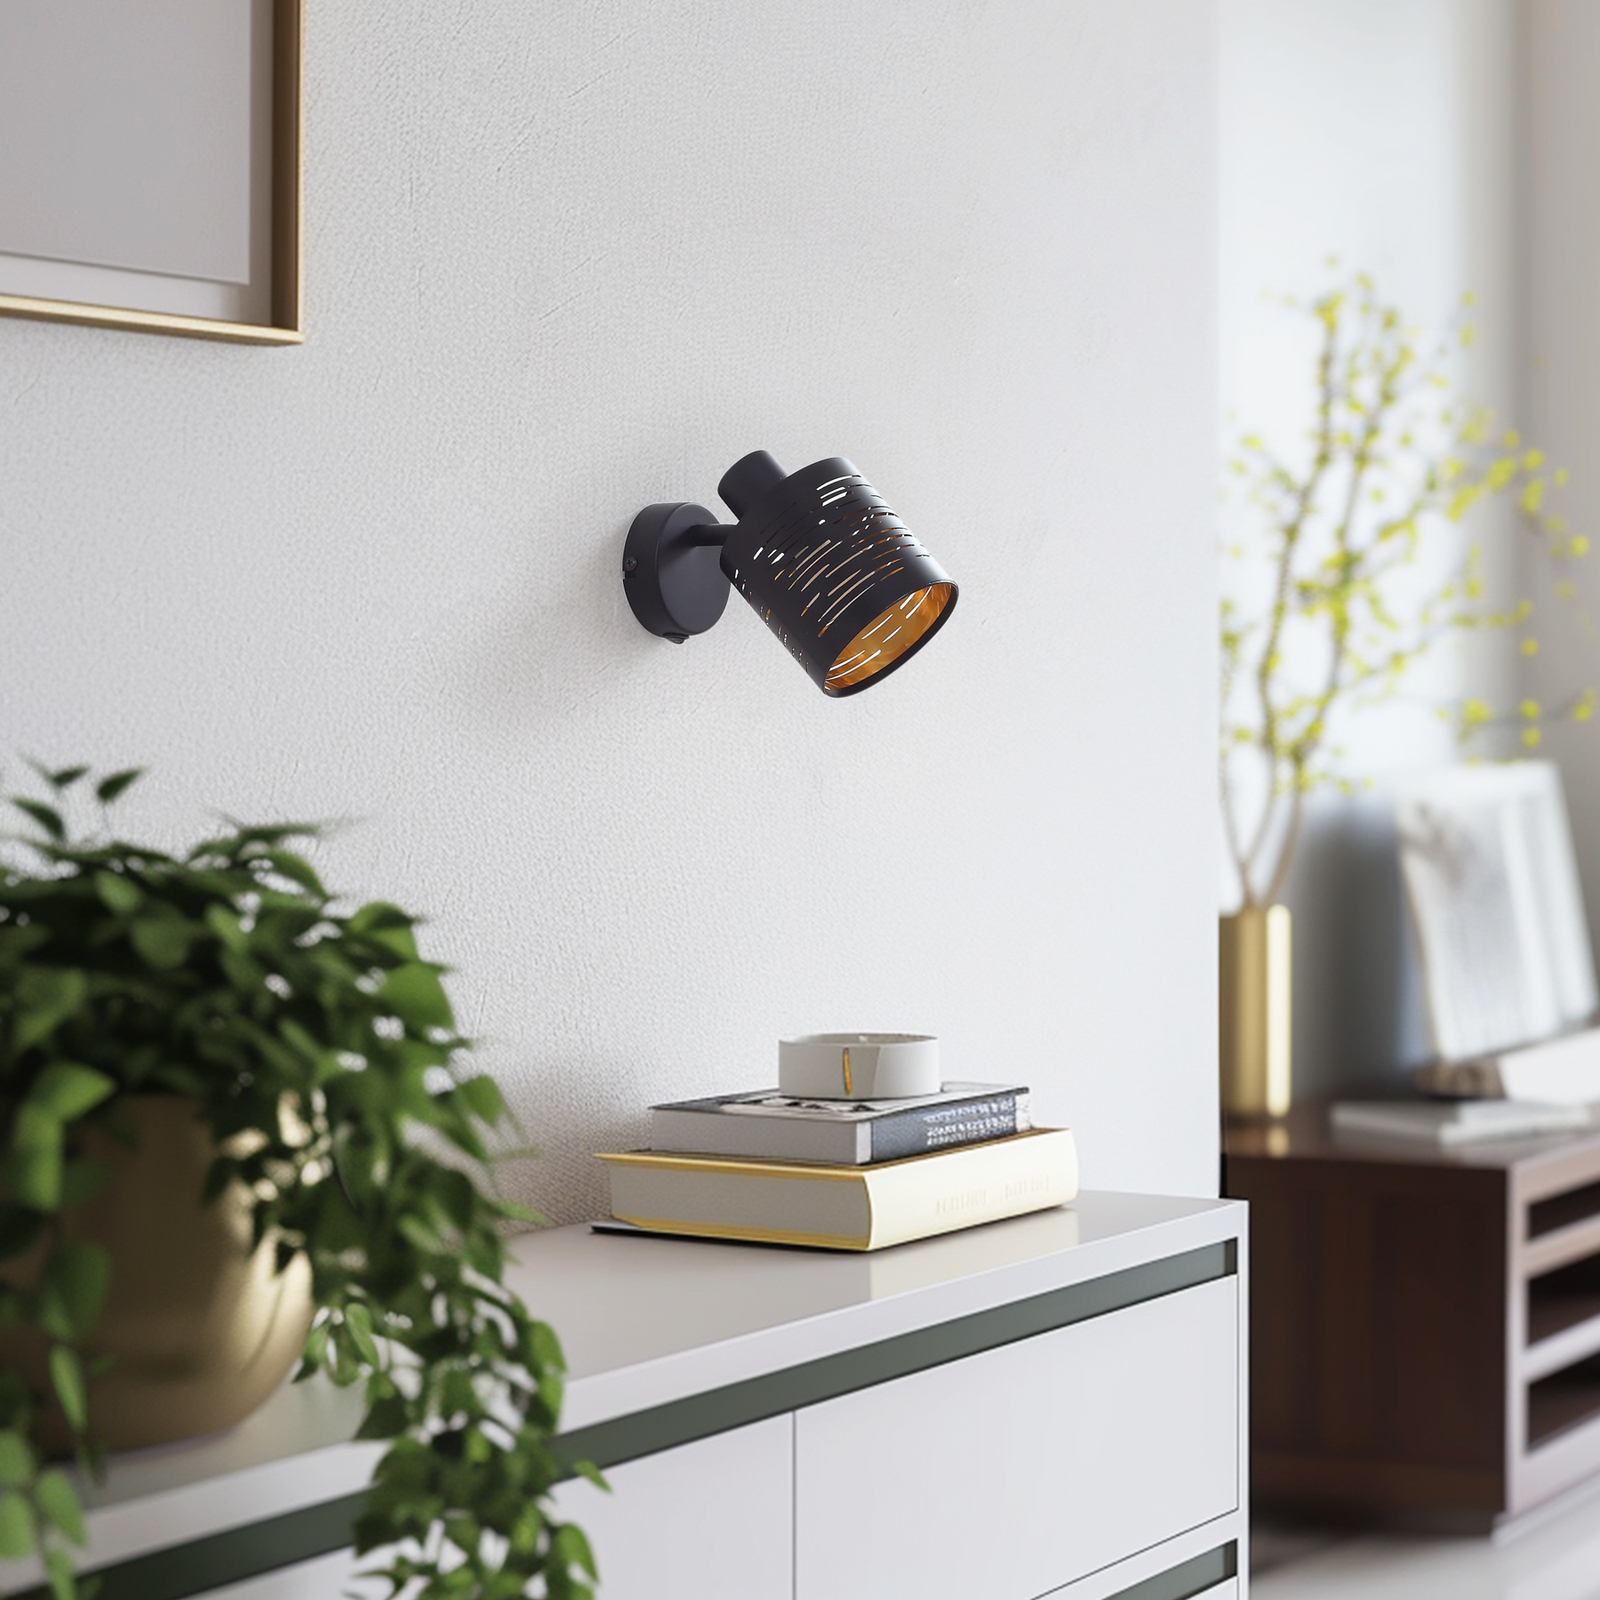 Lindby Iolyn wall light with switch